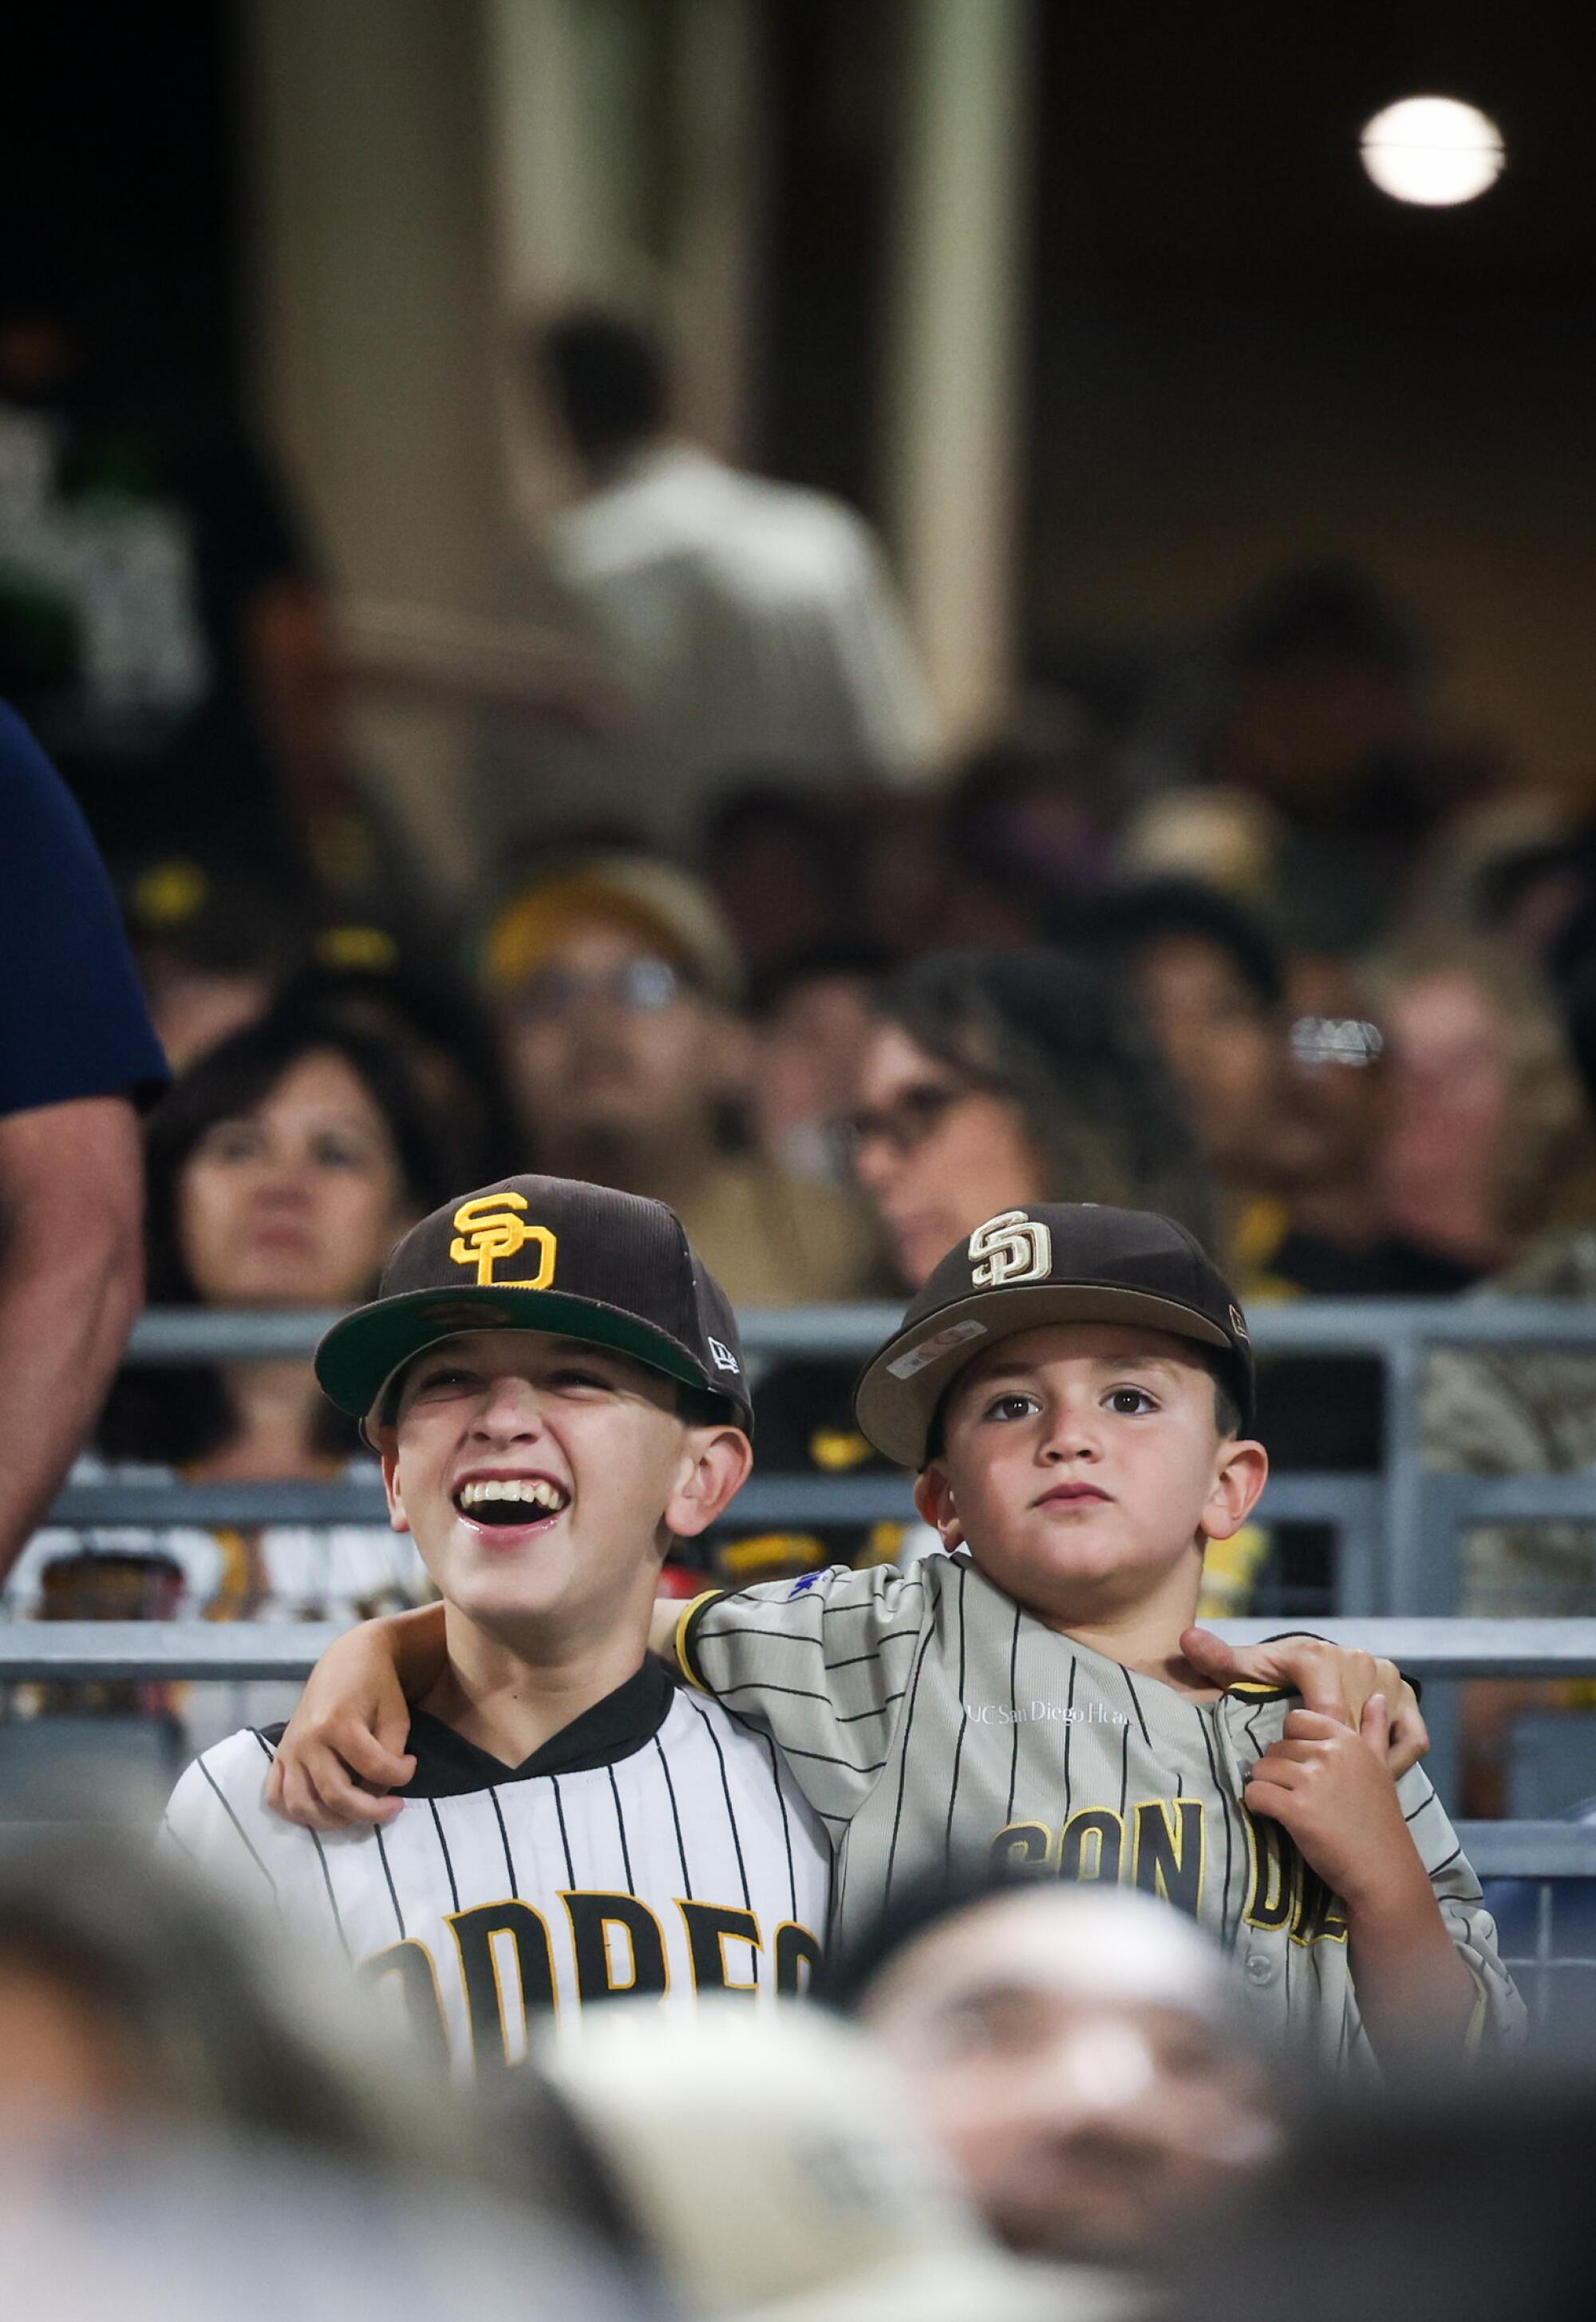 The Padres' MVP in 2023? Look in the mirror - The San Diego Union